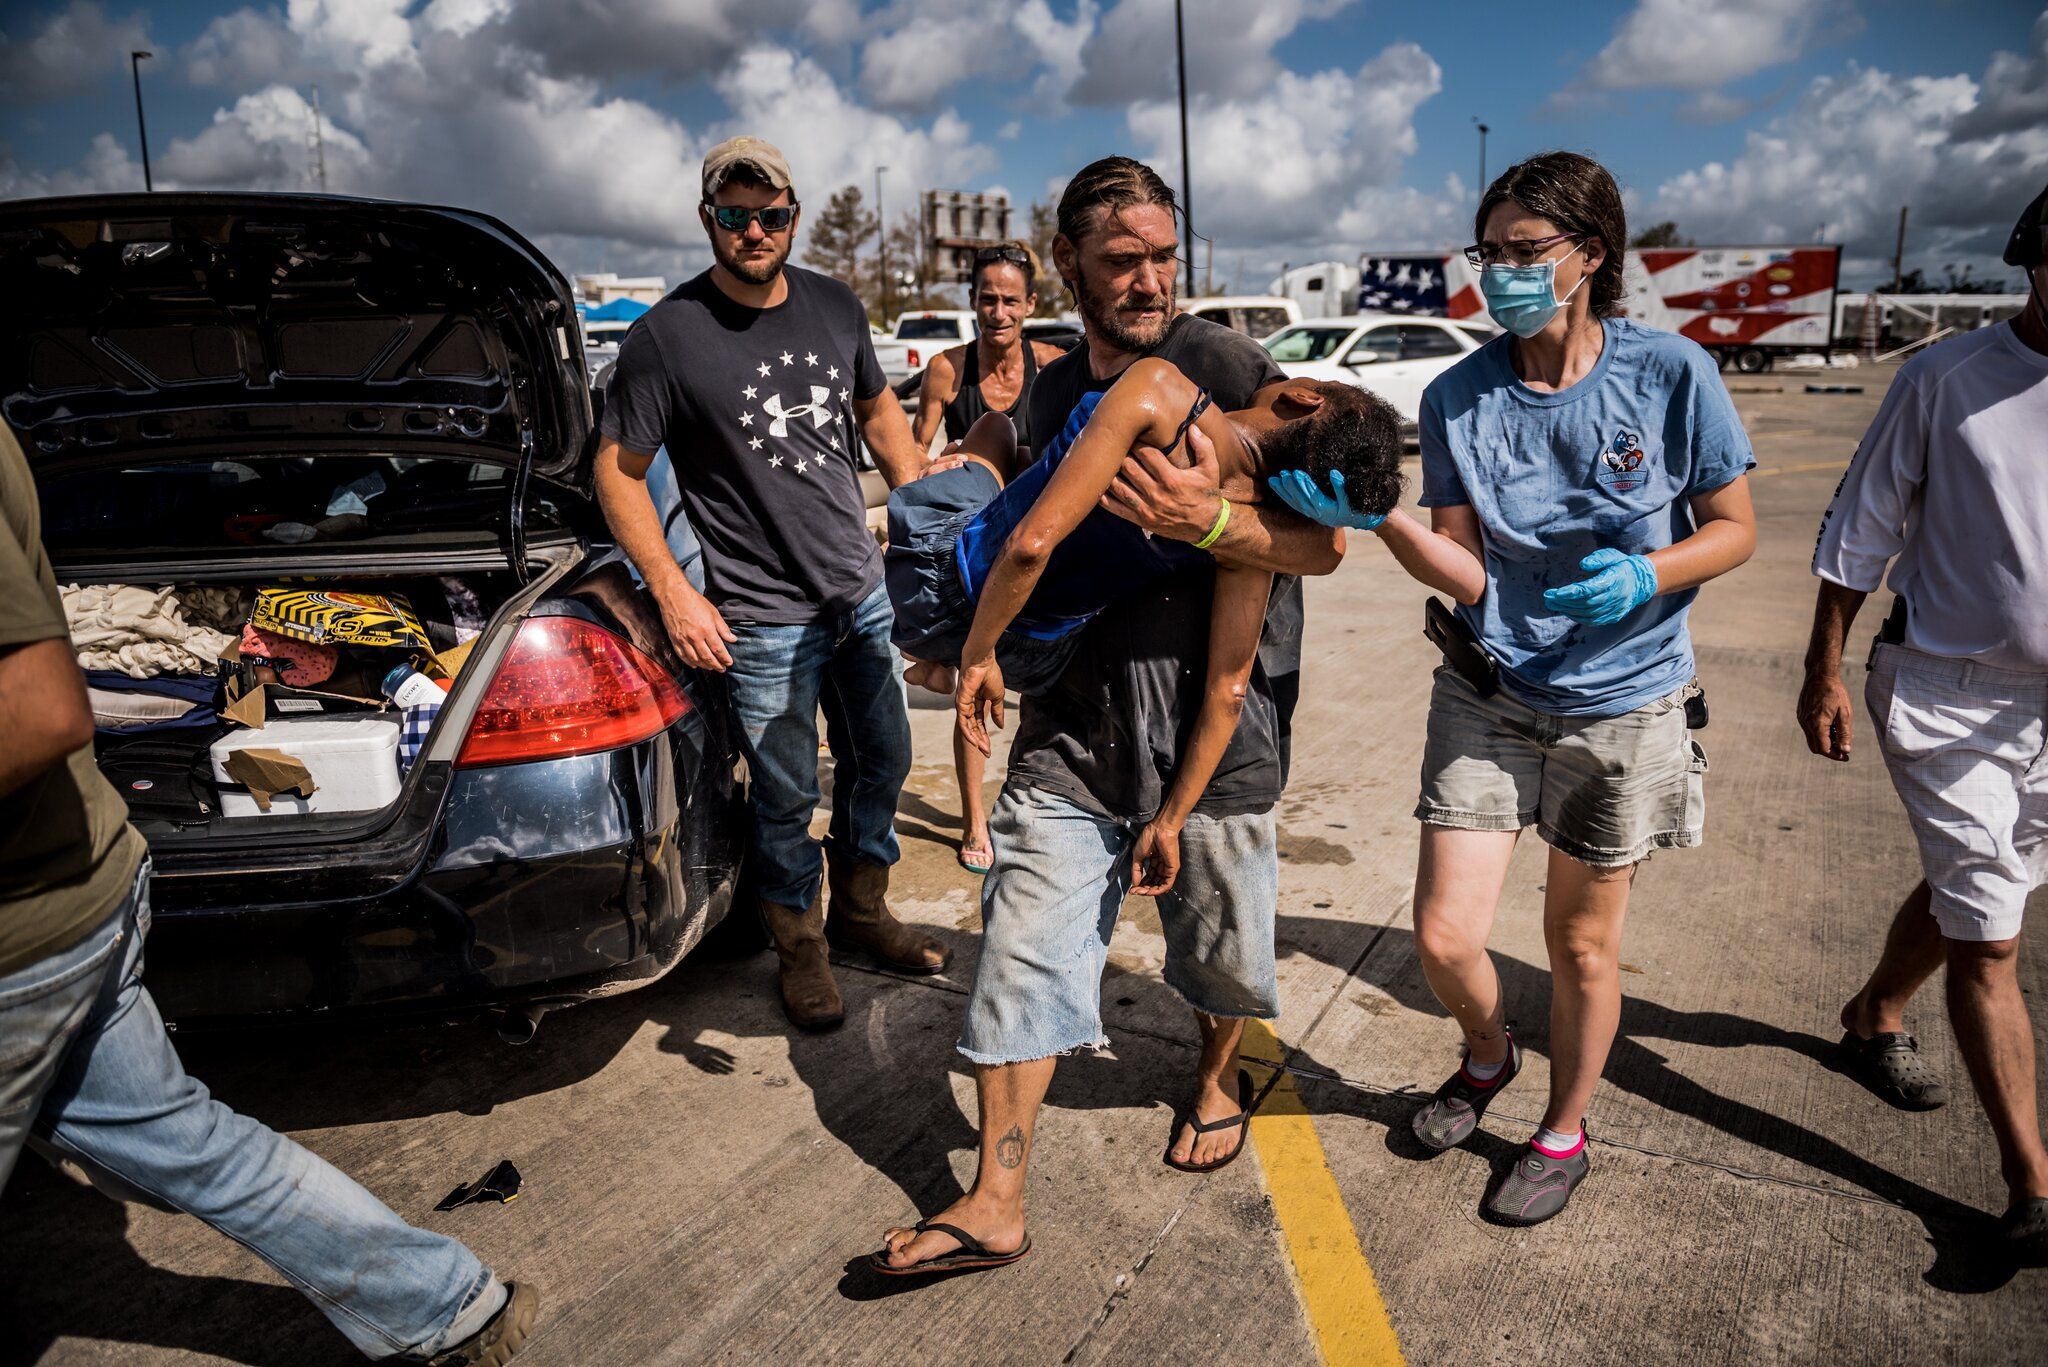 LAKE CHARLES, LA. A woman lost consciousness in a parking lot after Hurricane Laura left her without electricity or air-conditioning for several days. Image by Meridith Kohut. United States, 2020.